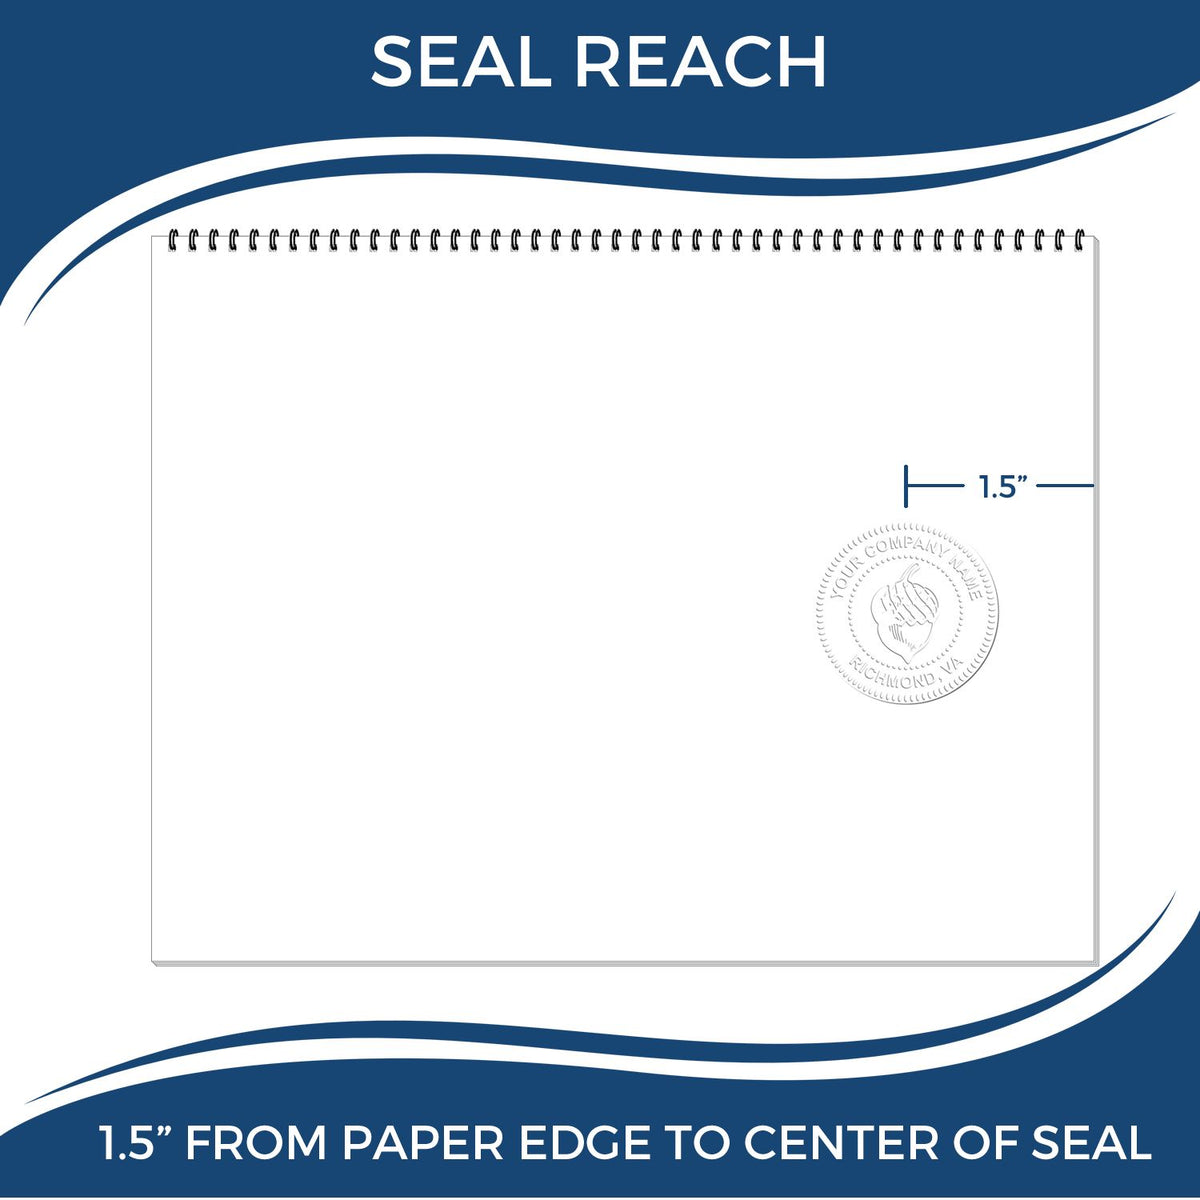 An infographic showing the seal reach which is represented by a ruler and a miniature seal image of the Handheld Illinois Professional Geologist Embosser